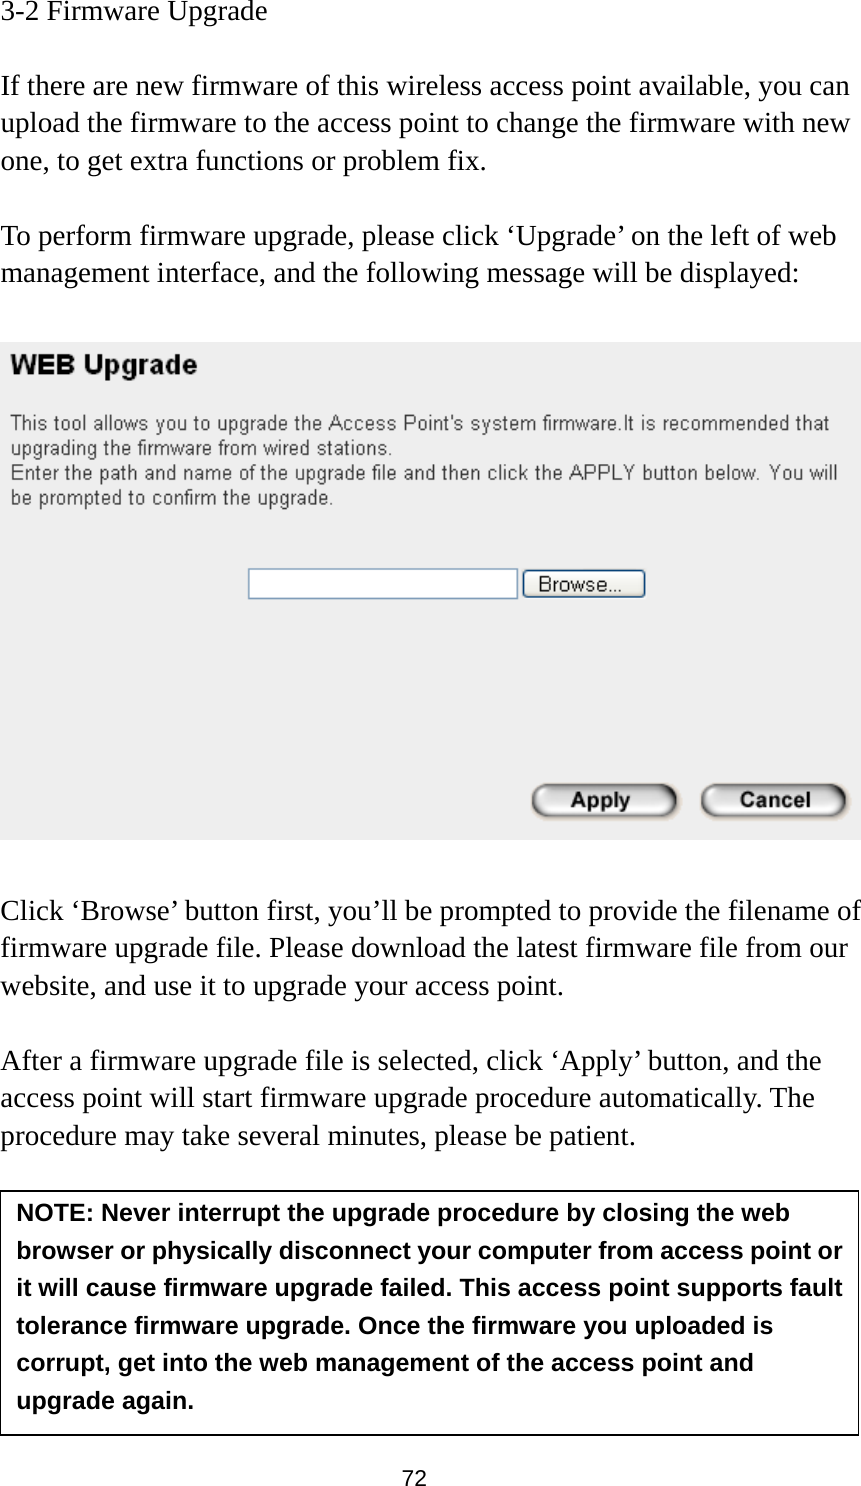 72 3-2 Firmware Upgrade  If there are new firmware of this wireless access point available, you can upload the firmware to the access point to change the firmware with new one, to get extra functions or problem fix.  To perform firmware upgrade, please click ‘Upgrade’ on the left of web management interface, and the following message will be displayed:    Click ‘Browse’ button first, you’ll be prompted to provide the filename of firmware upgrade file. Please download the latest firmware file from our website, and use it to upgrade your access point.    After a firmware upgrade file is selected, click ‘Apply’ button, and the access point will start firmware upgrade procedure automatically. The procedure may take several minutes, please be patient.   NOTE: Never interrupt the upgrade procedure by closing the web browser or physically disconnect your computer from access point or it will cause firmware upgrade failed. This access point supports fault tolerance firmware upgrade. Once the firmware you uploaded is corrupt, get into the web management of the access point and upgrade again. 